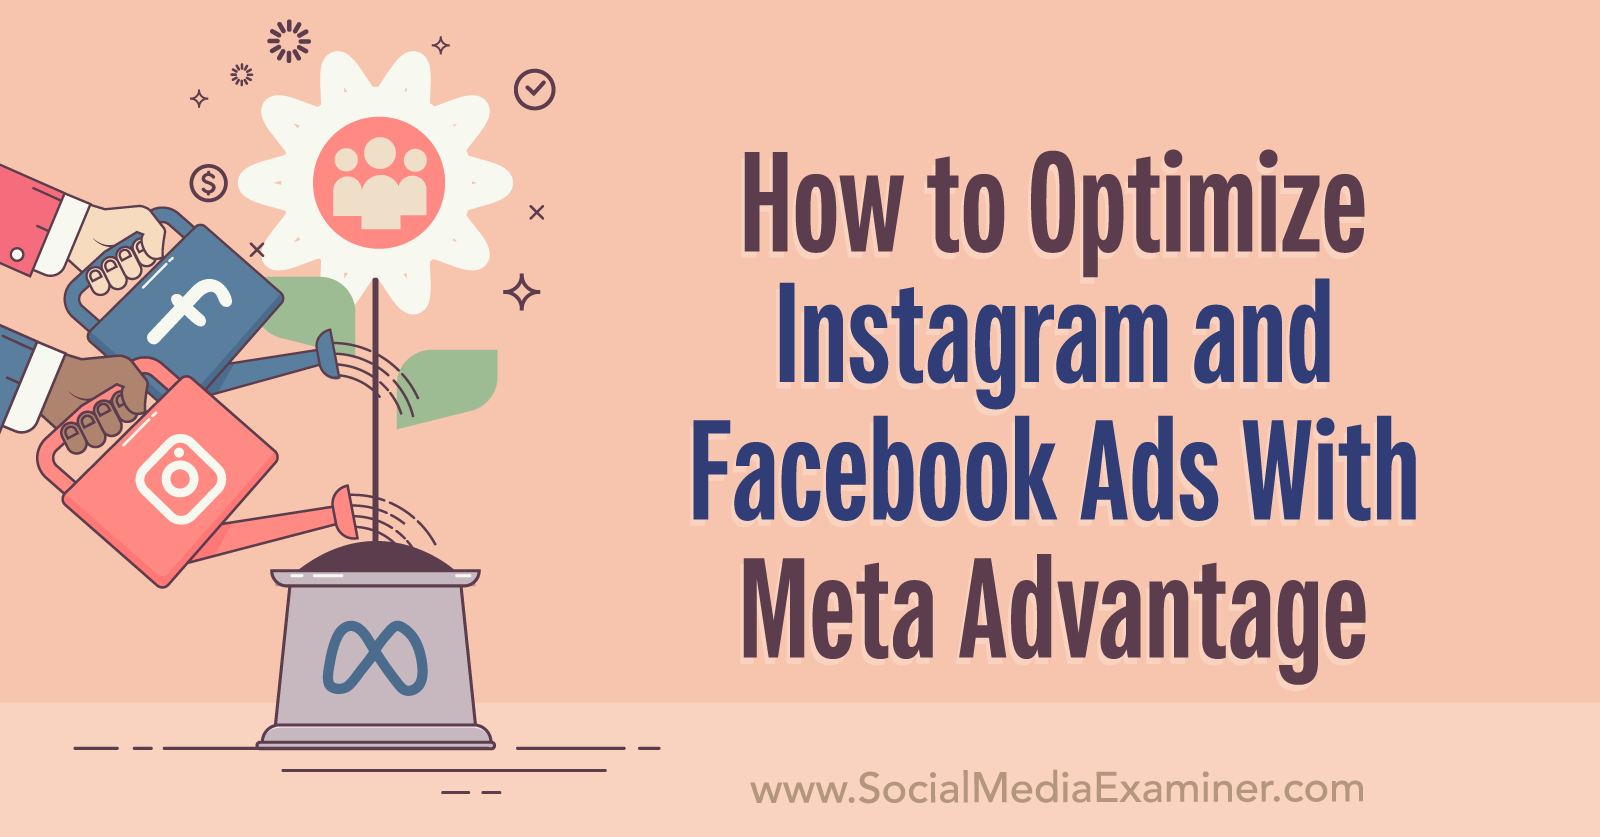 How to Optimize Instagram and Facebook Ads With Meta Advantage-Social Media Examiner